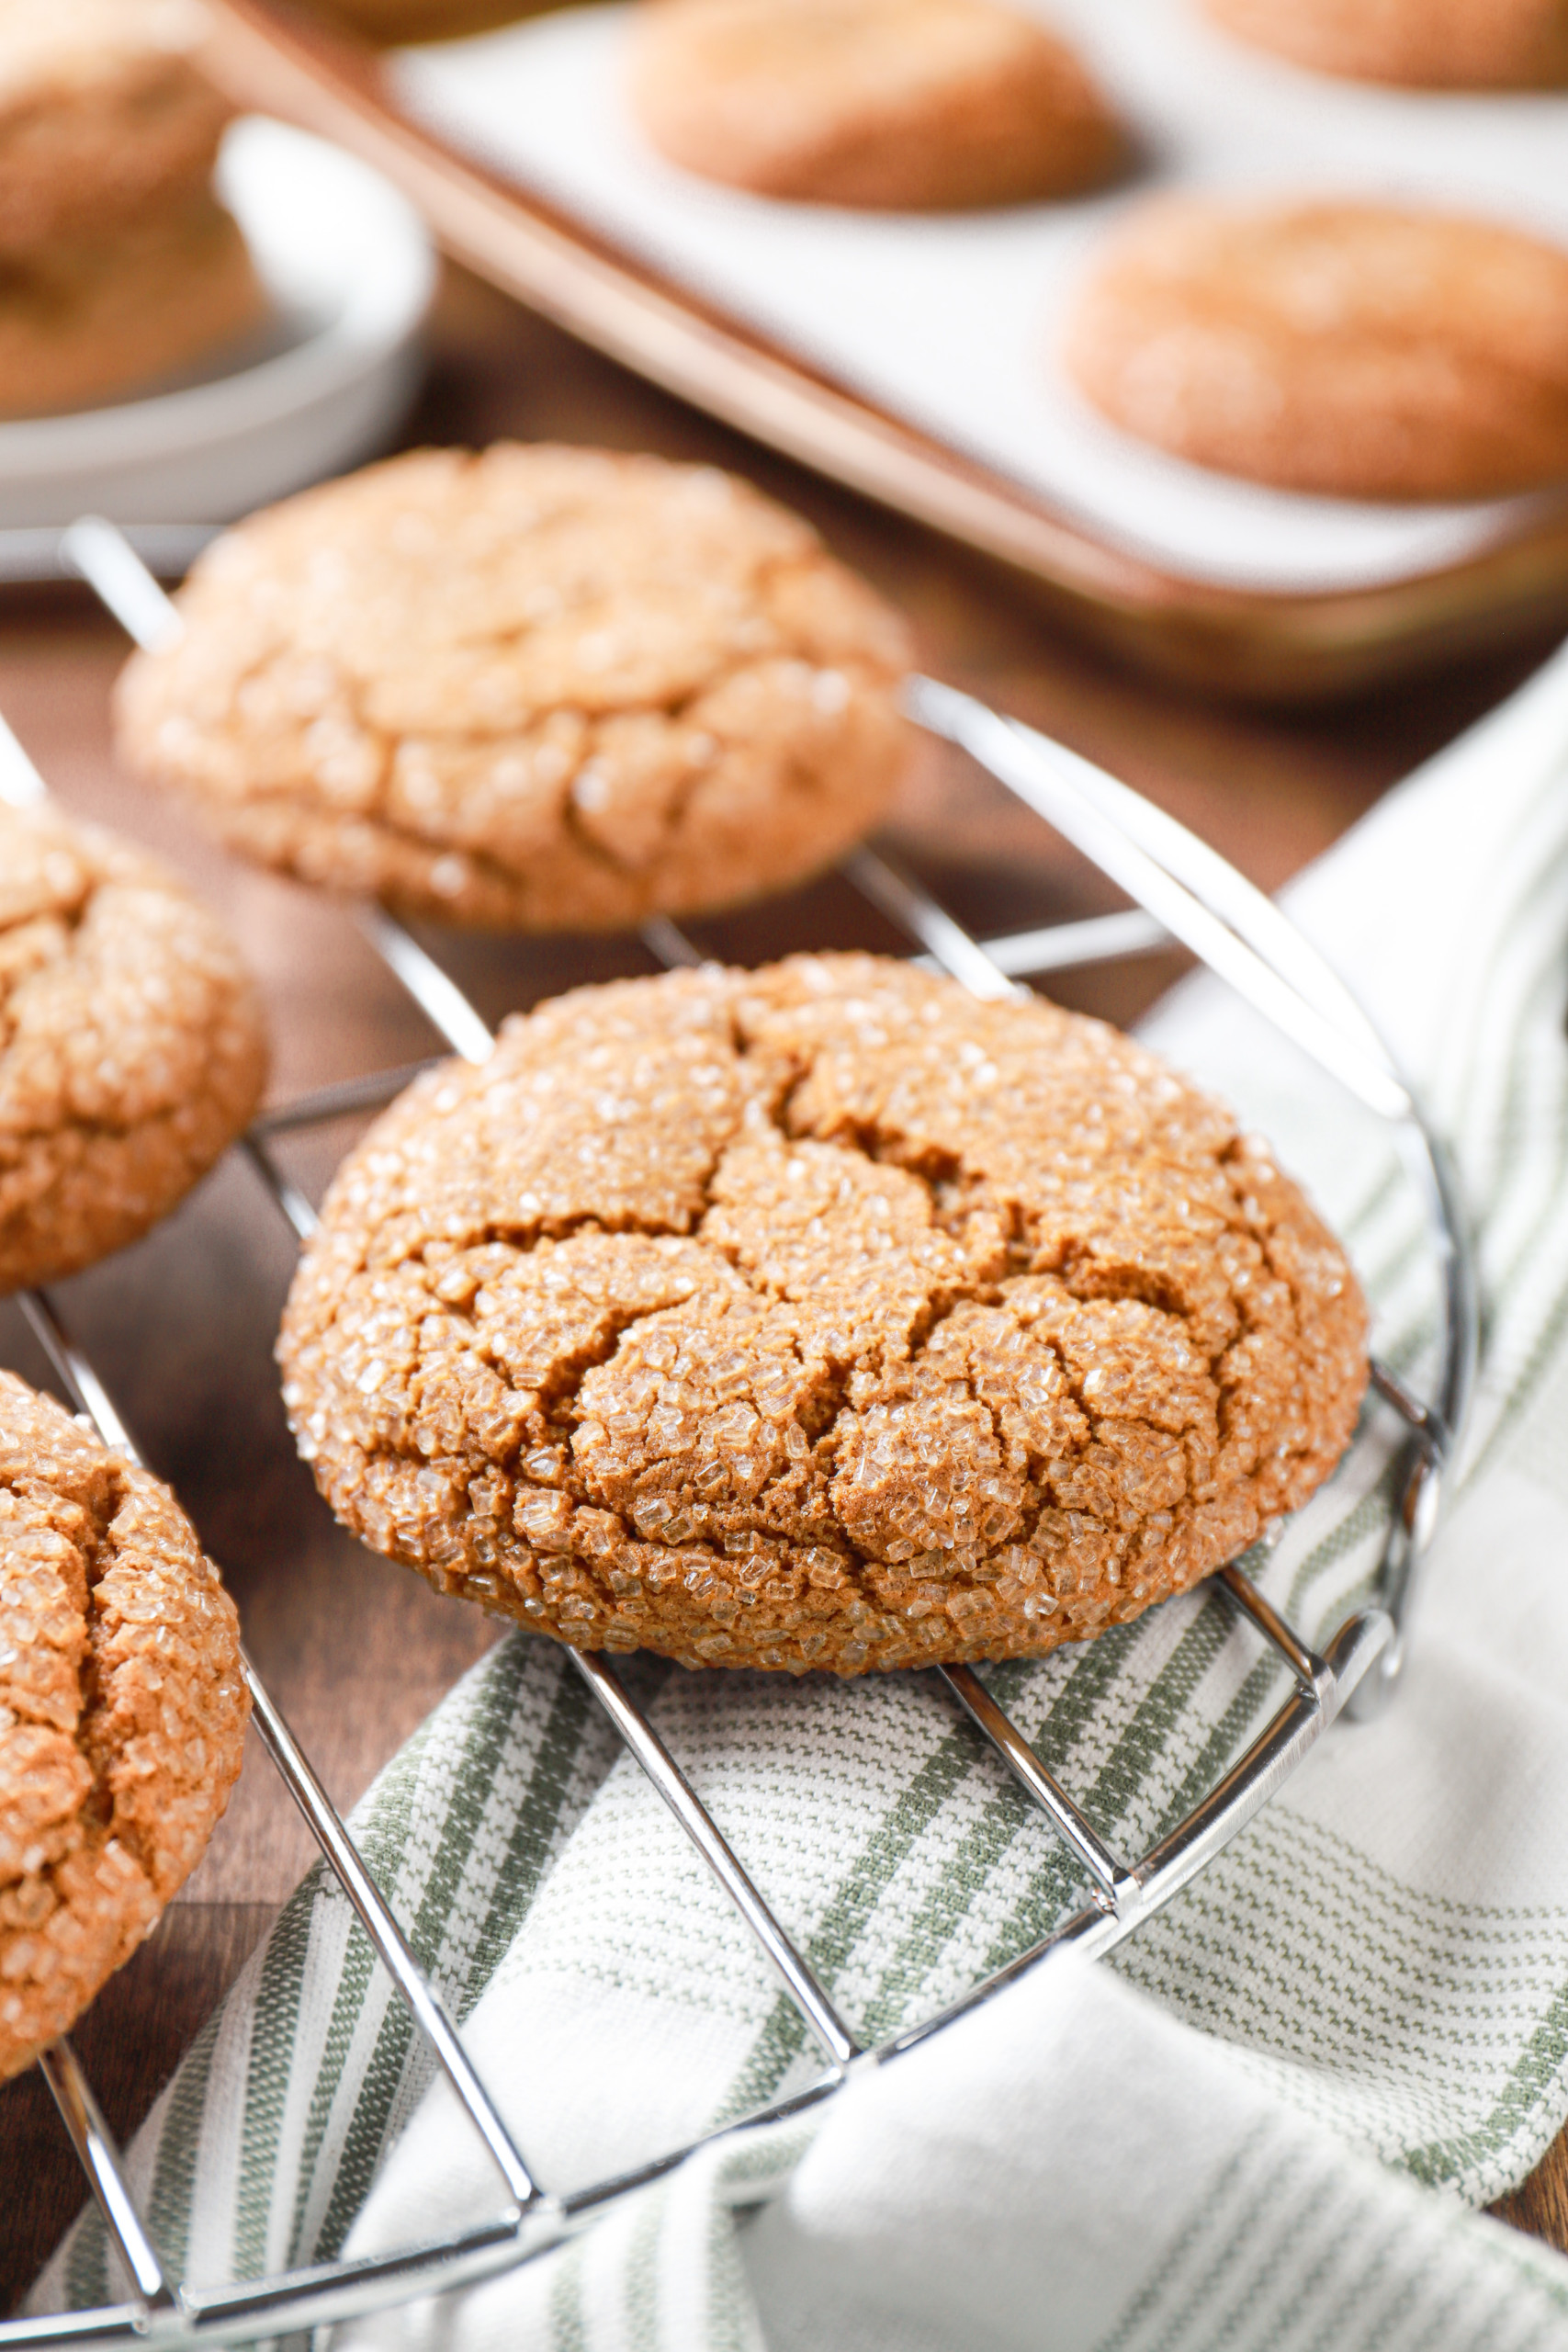 https://www.a-kitchen-addiction.com/wp-content/uploads/2022/12/bakery-style-molasses-cookies-recipe-vert-angle-scaled.jpg